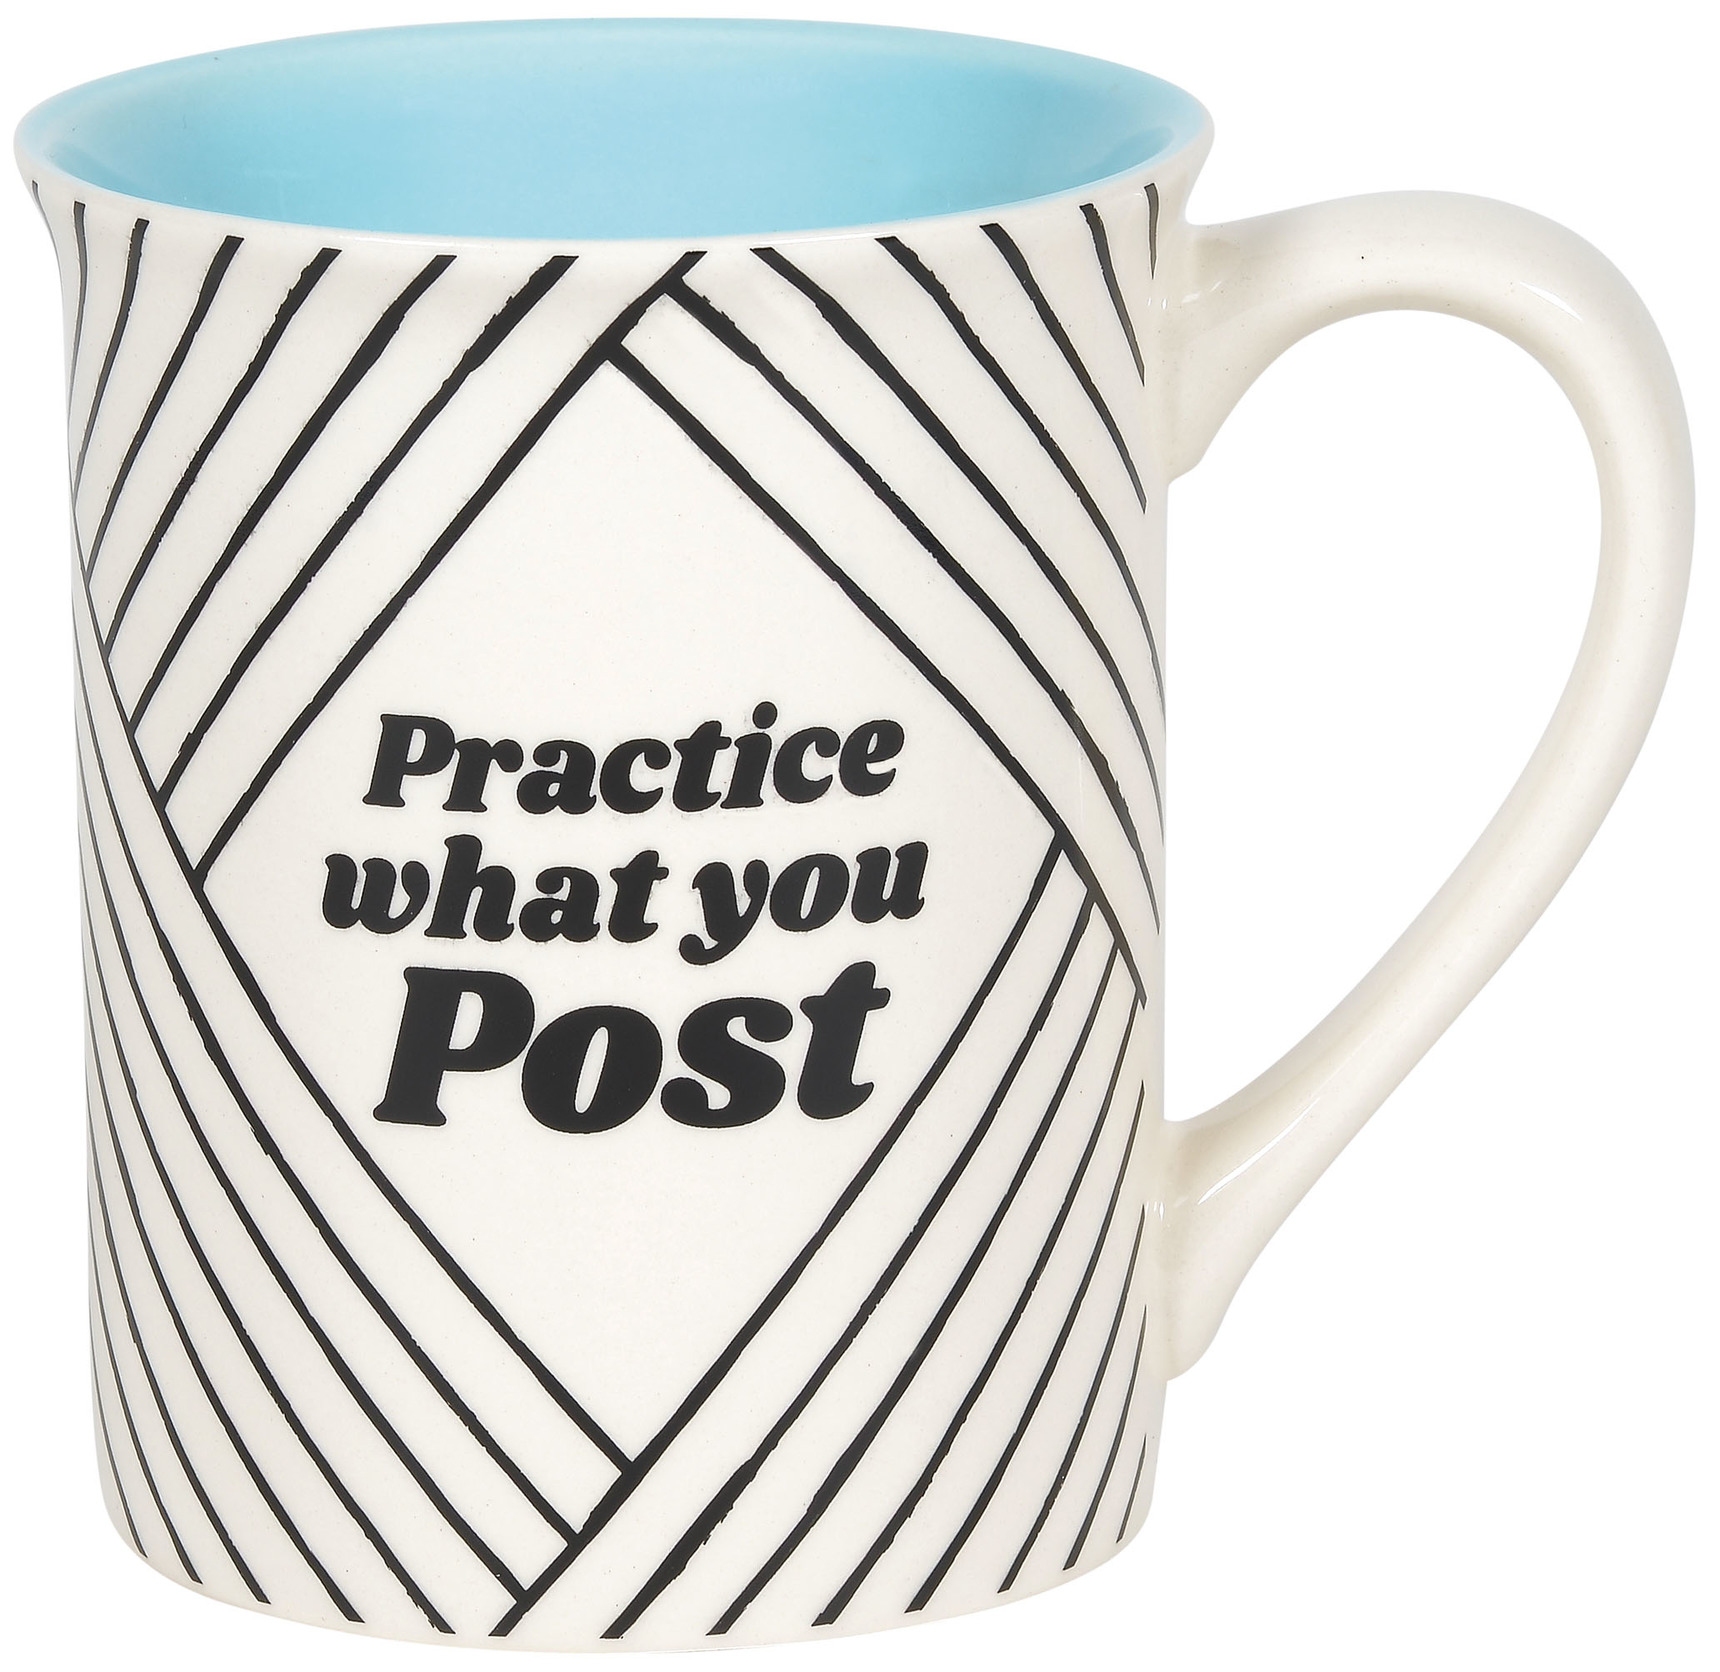 Our Name Is Mud 6006712 Practice What You Post Mug Set of 2